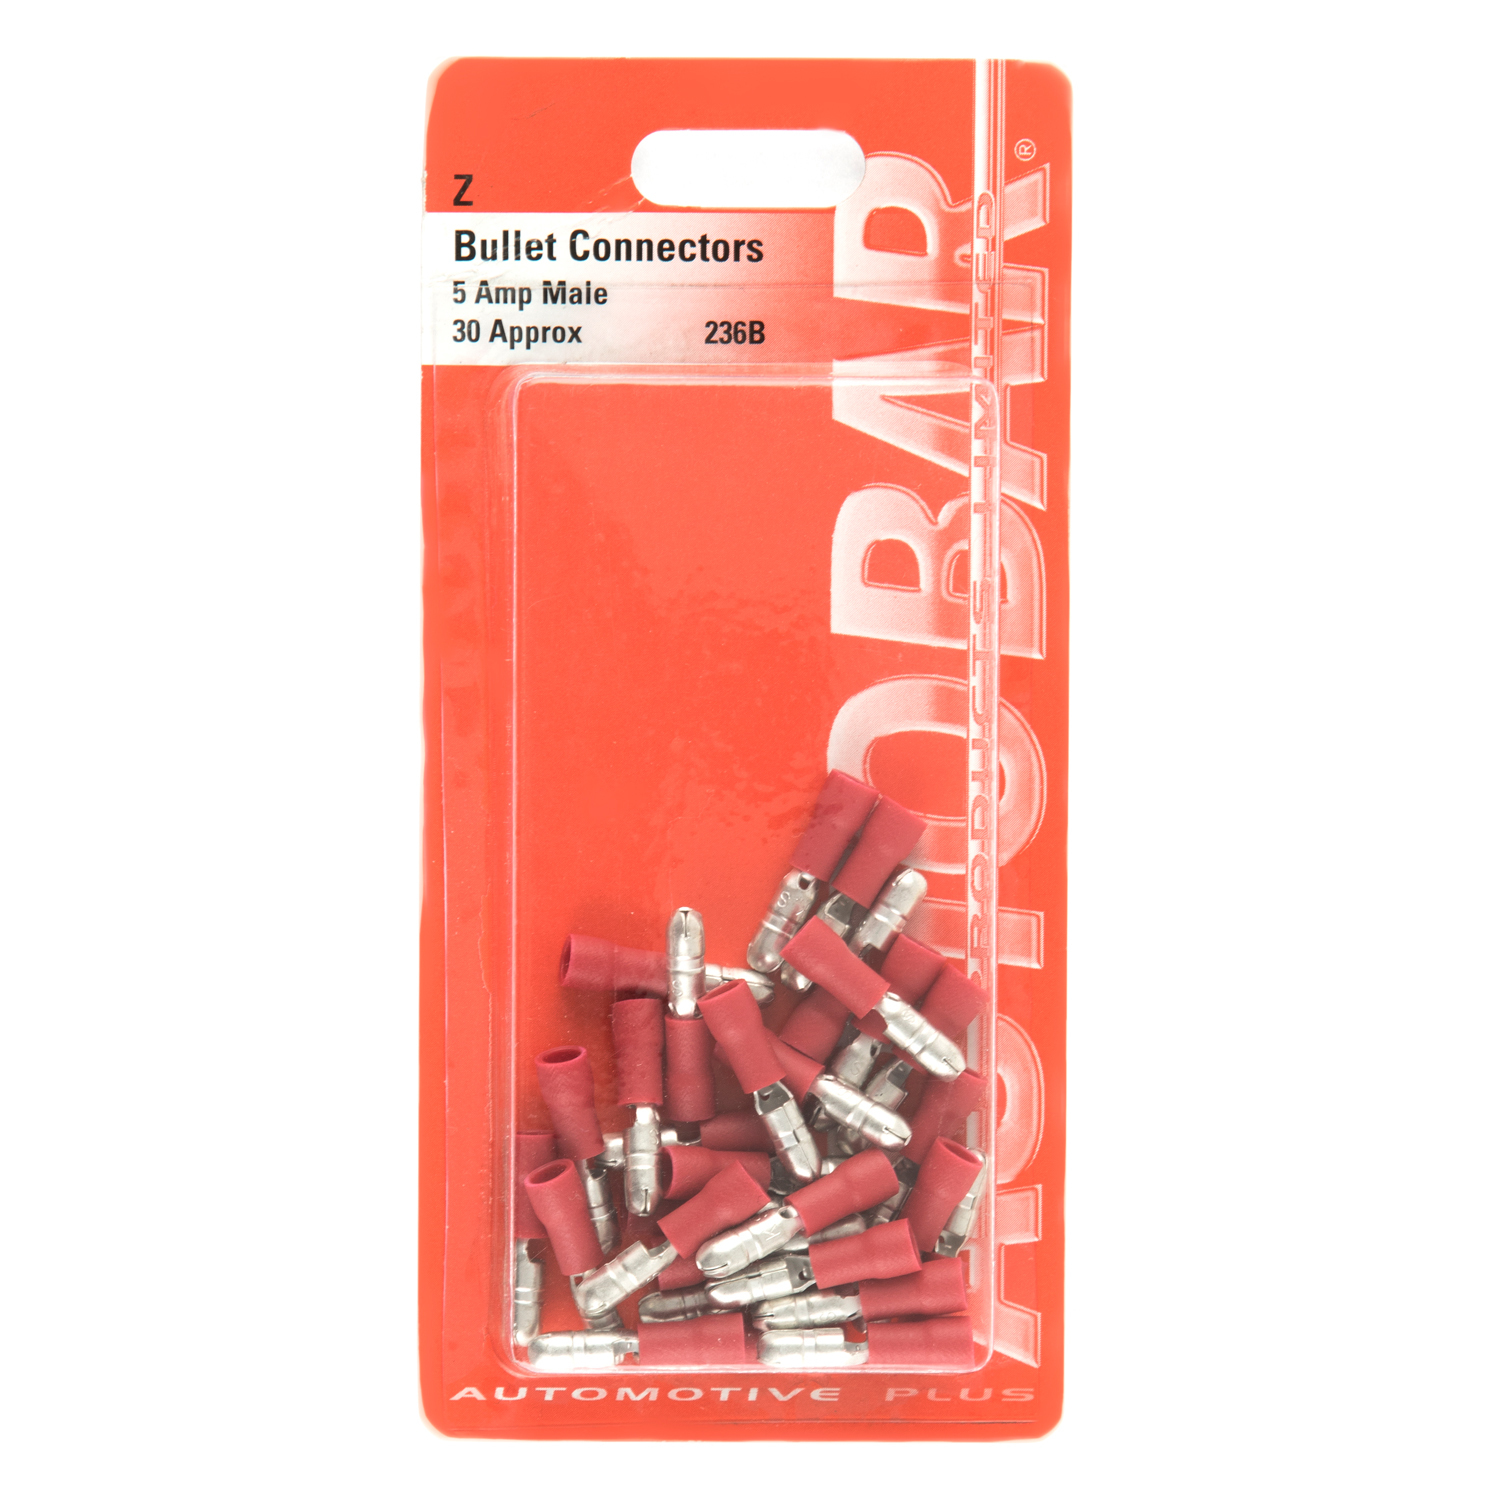 Autobar 5 Amp Red Male Bullet Connectors 30 Pack Image